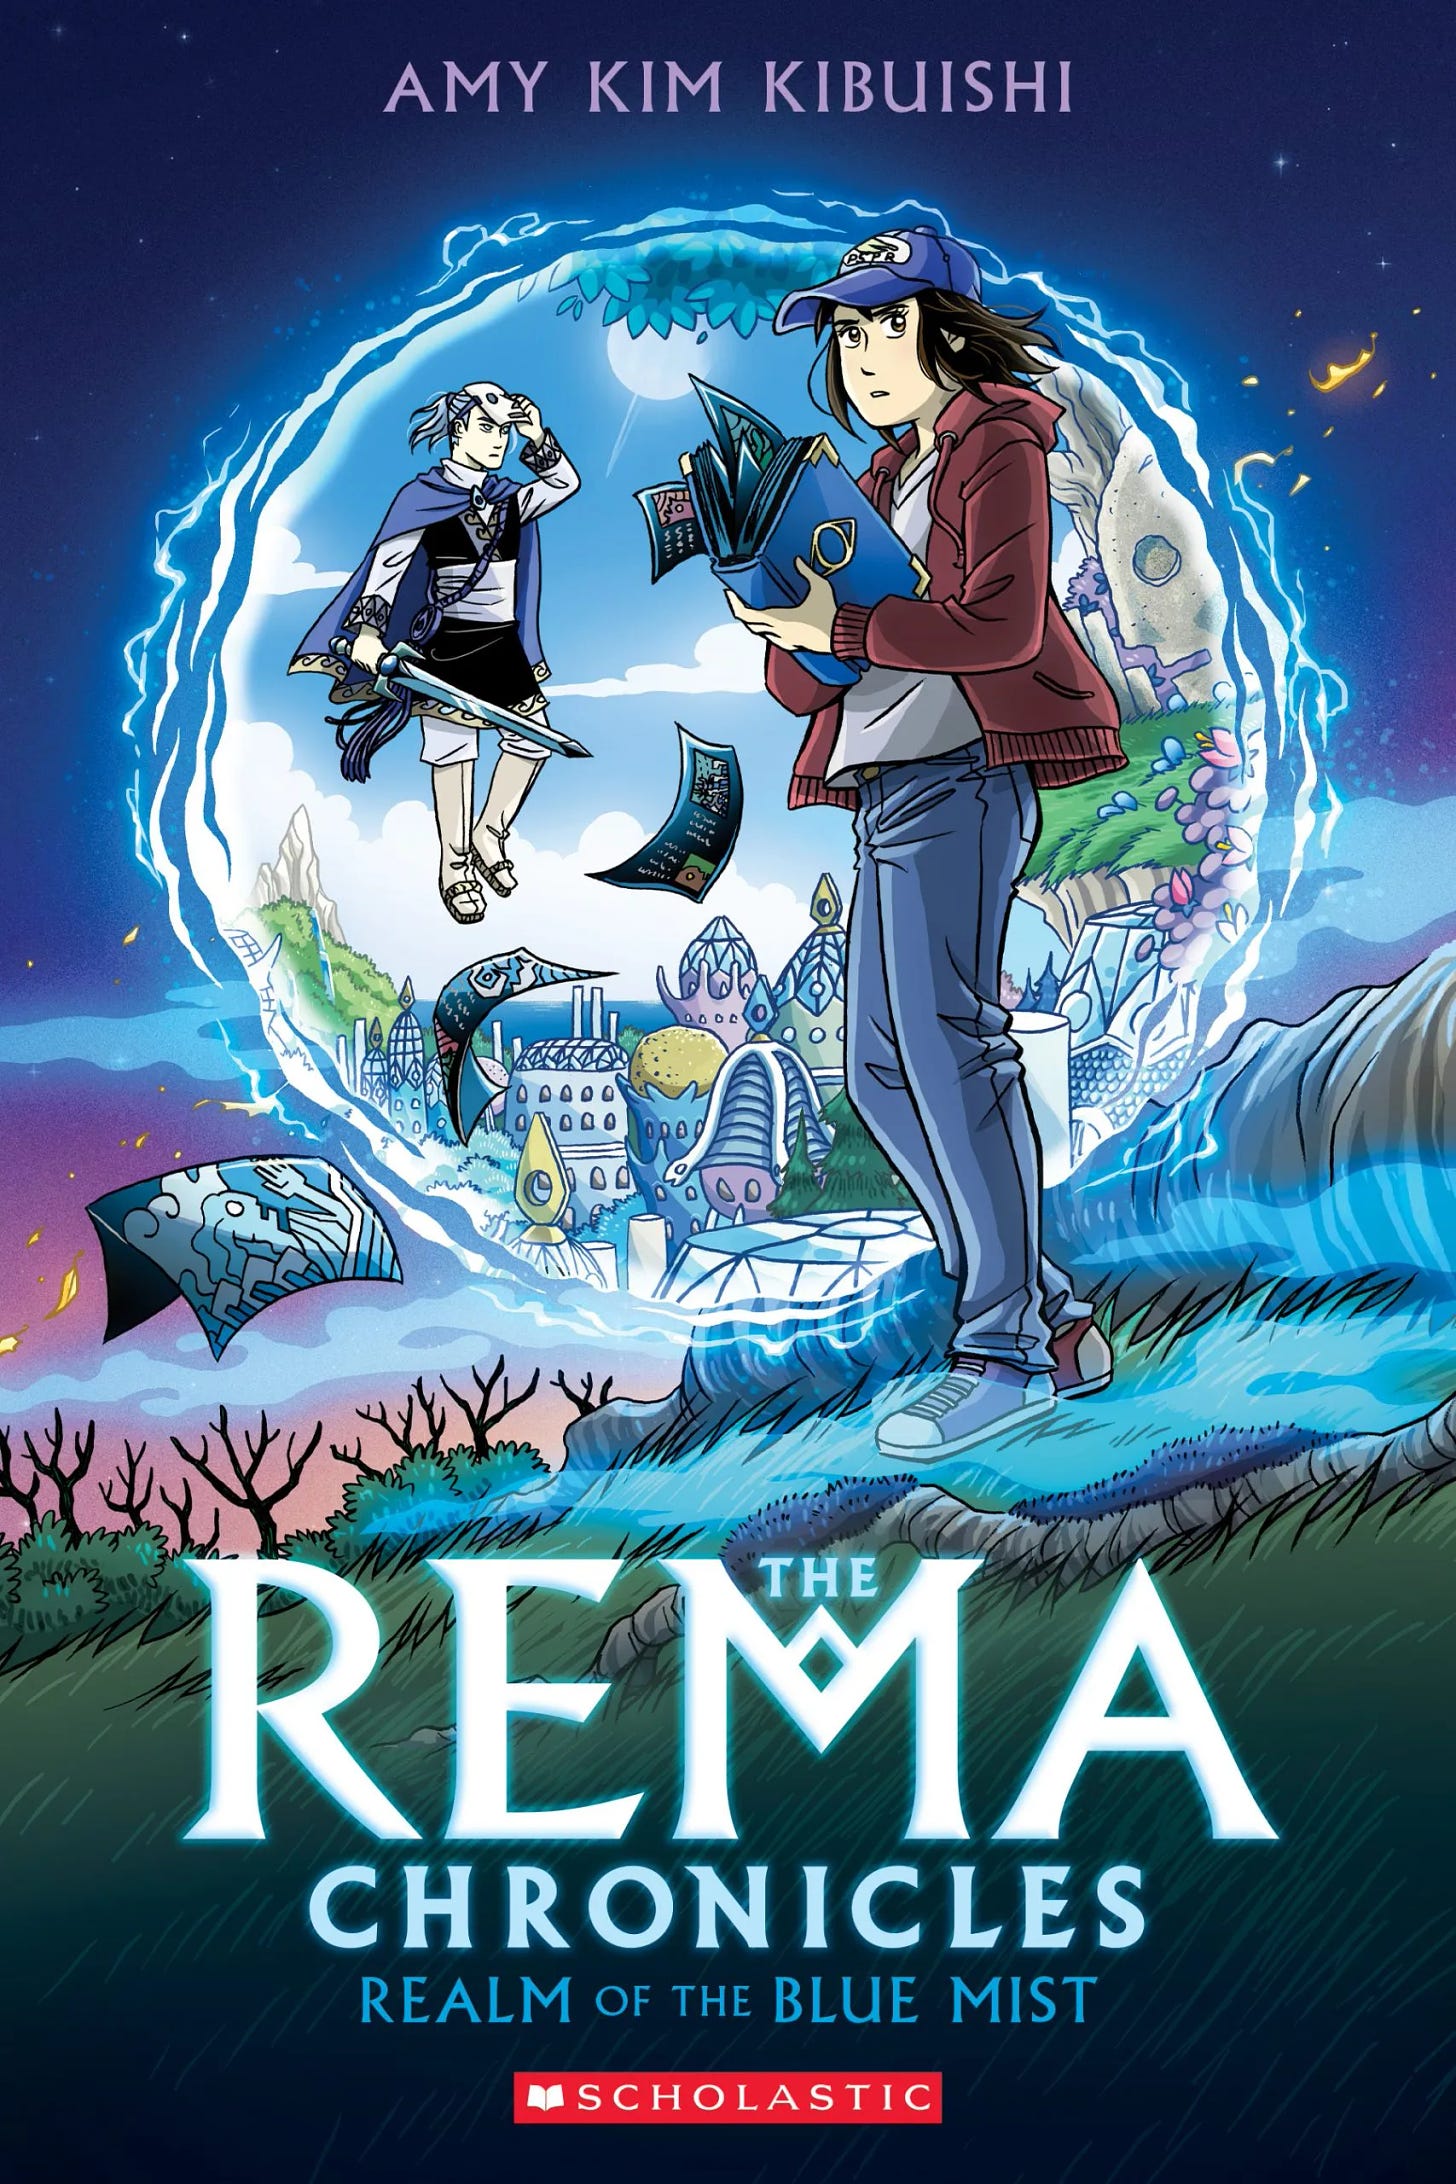 Cover for Amy Kim Kibuishi's The Rema Chronicles: Realm of the Blue Mist. Tabby a young girl in a baseball cap stands on a hillside infant of a portal. Just inside the portal to Tabby's left Keeper Philip floats, he is lifting a white mask off his face.